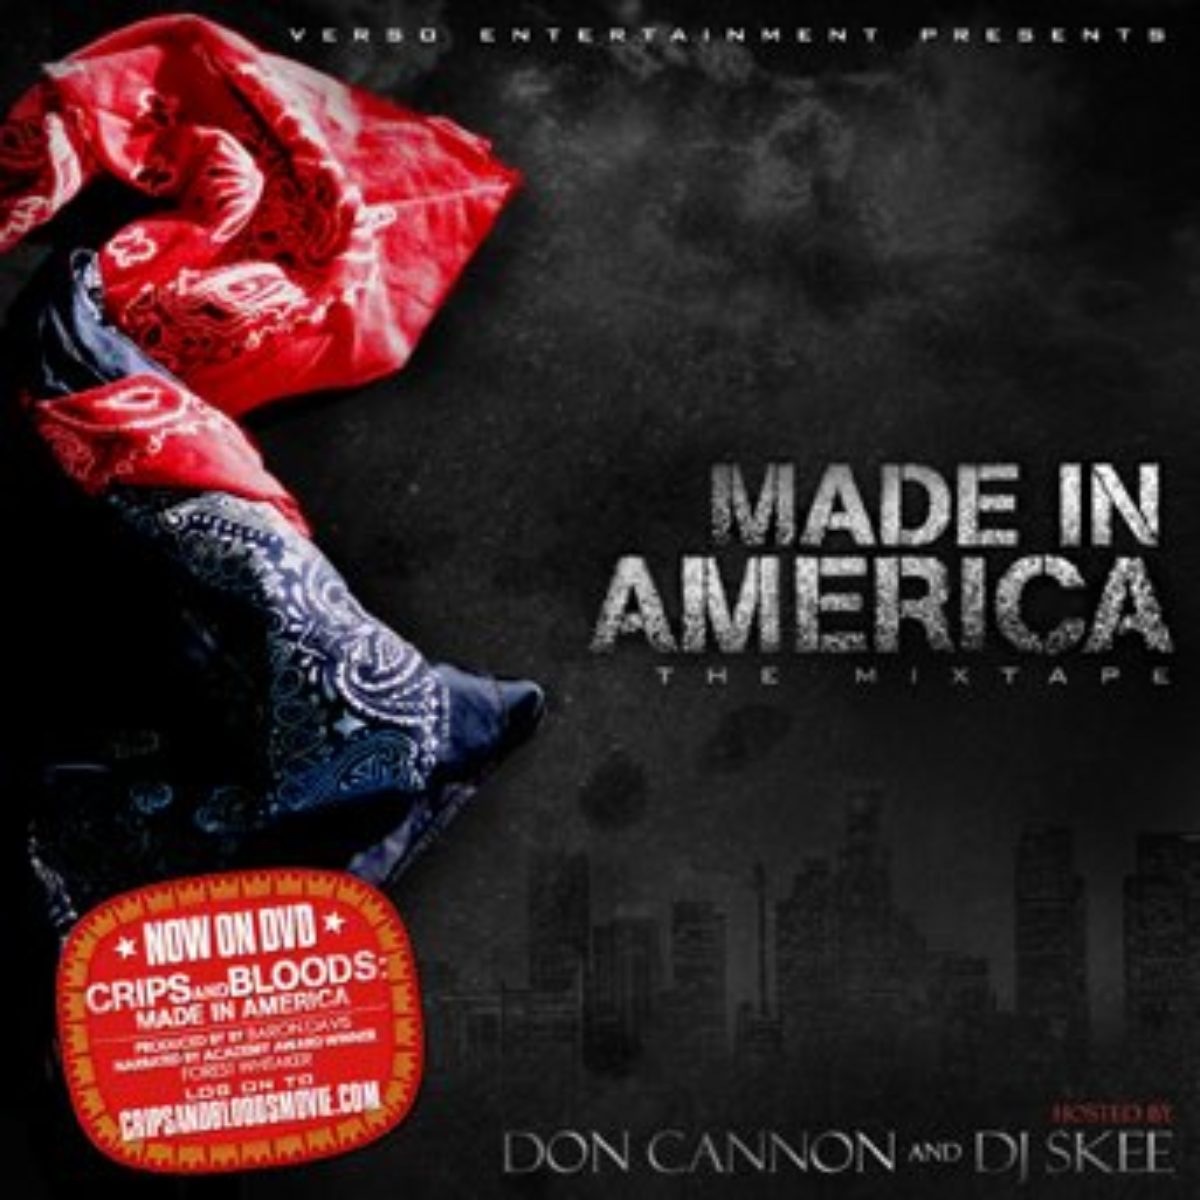 Bang us. Crips and Bloods made in America. Made in America исполнители. Kam - made in America. Lil Wayne Bloods.